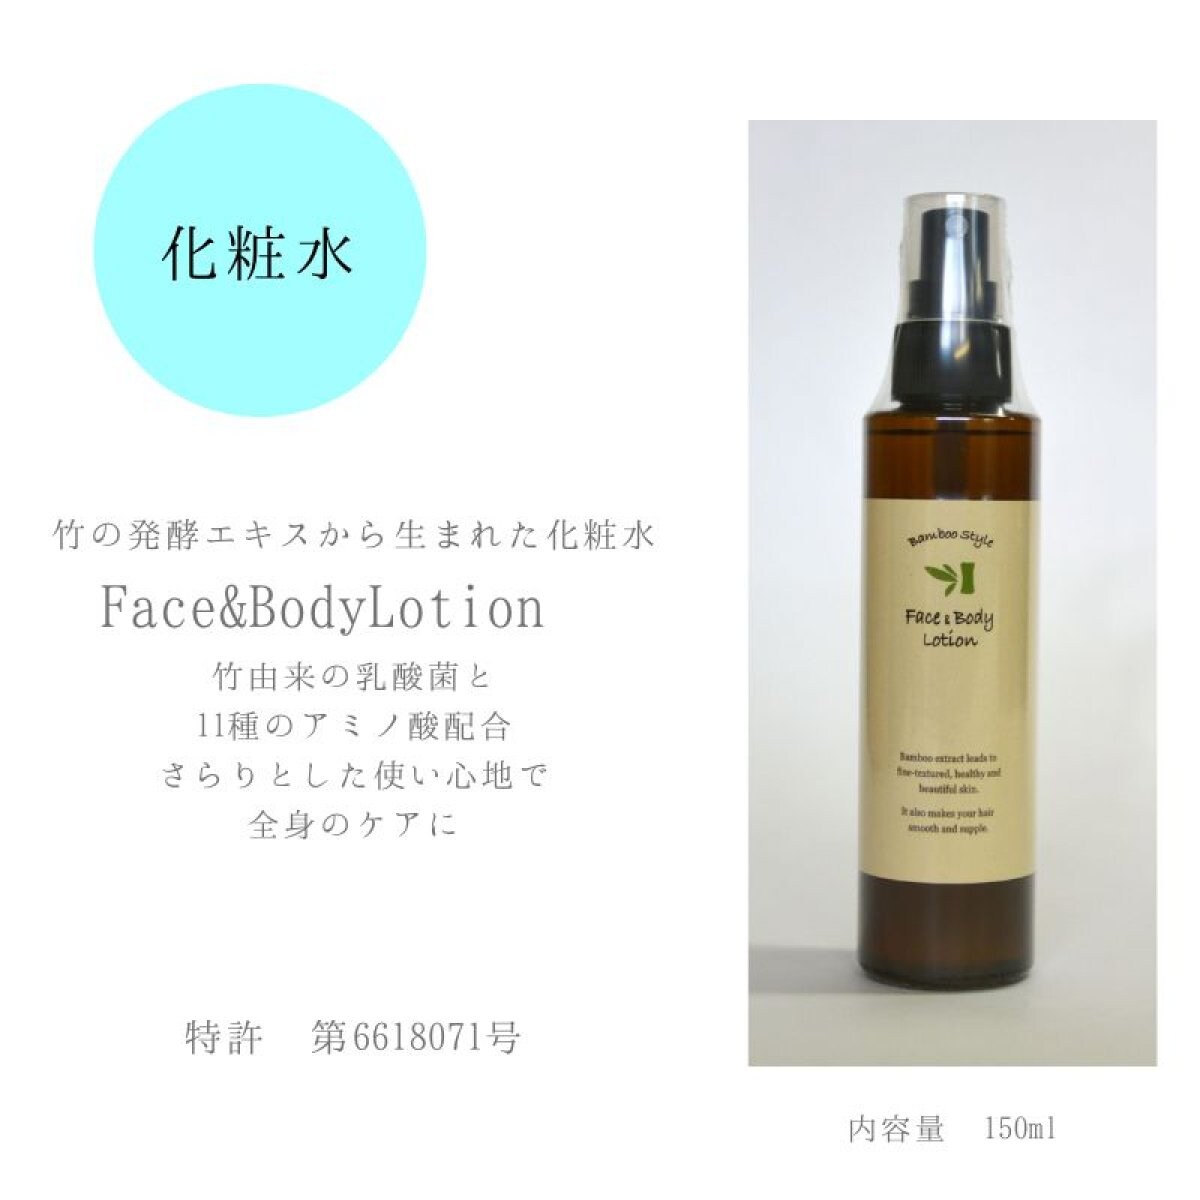 Face & Body Lotion 150ml